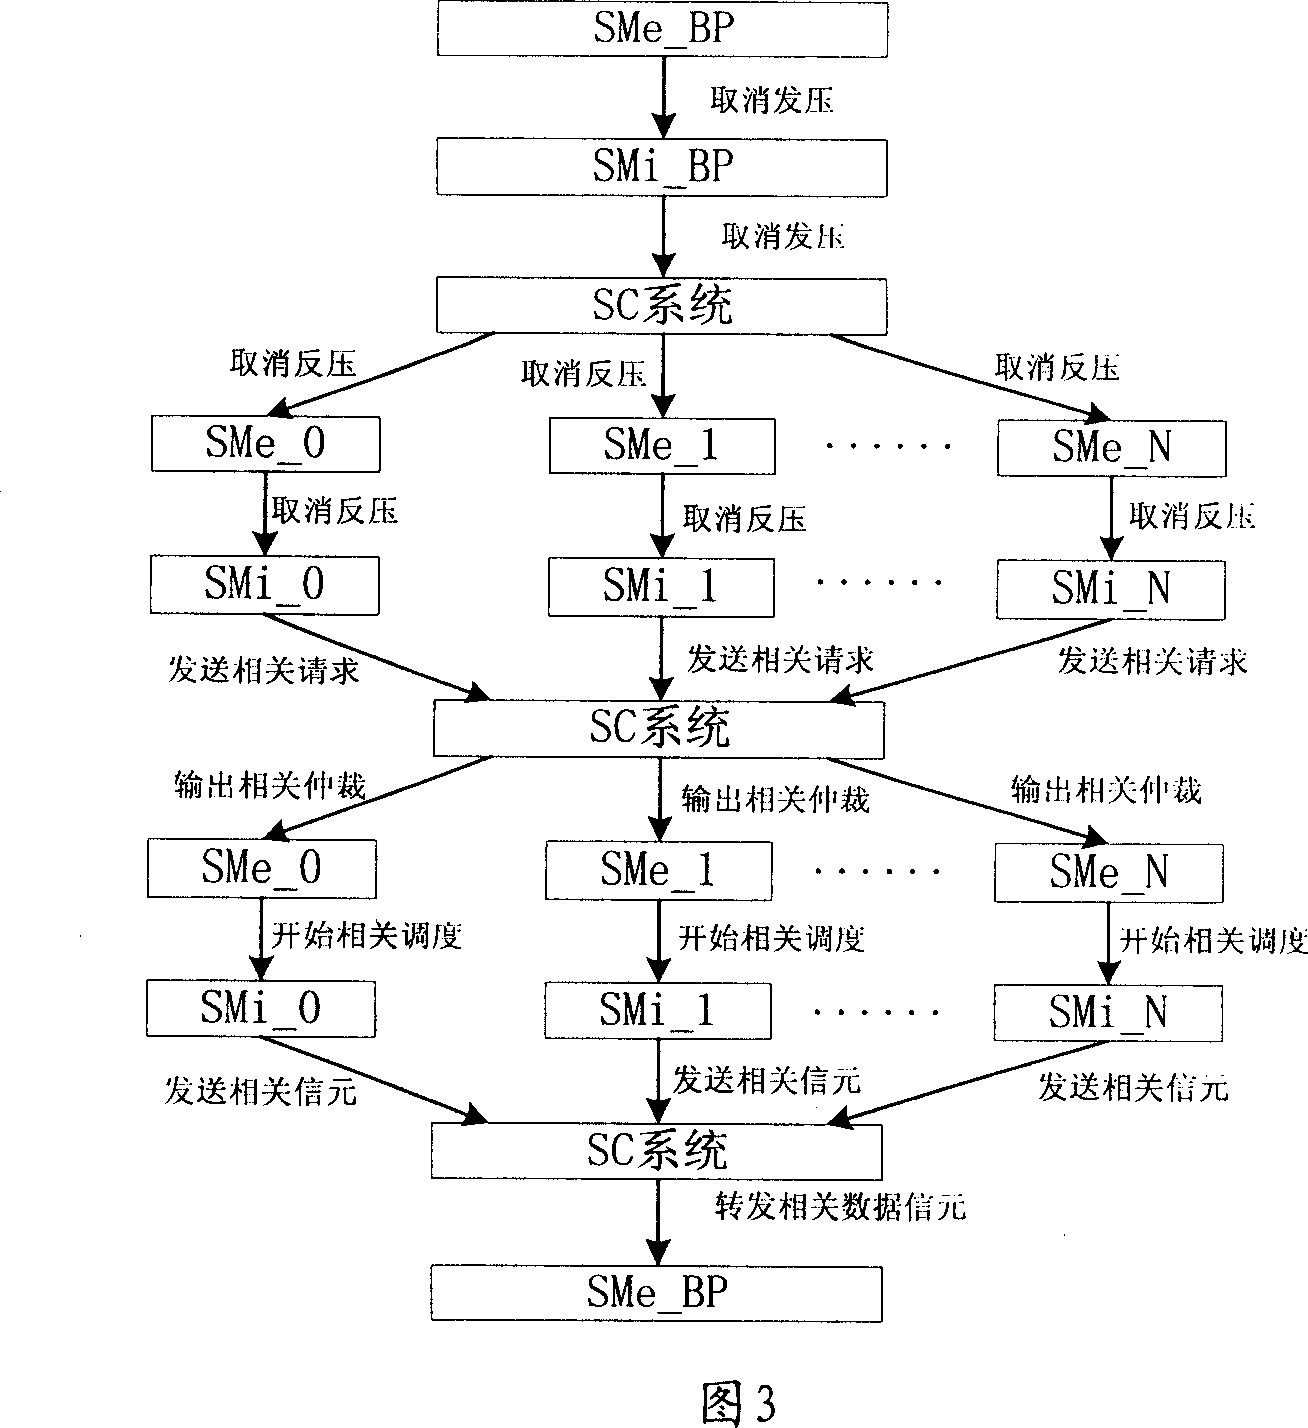 Flow control implementation method and device based on the output queue